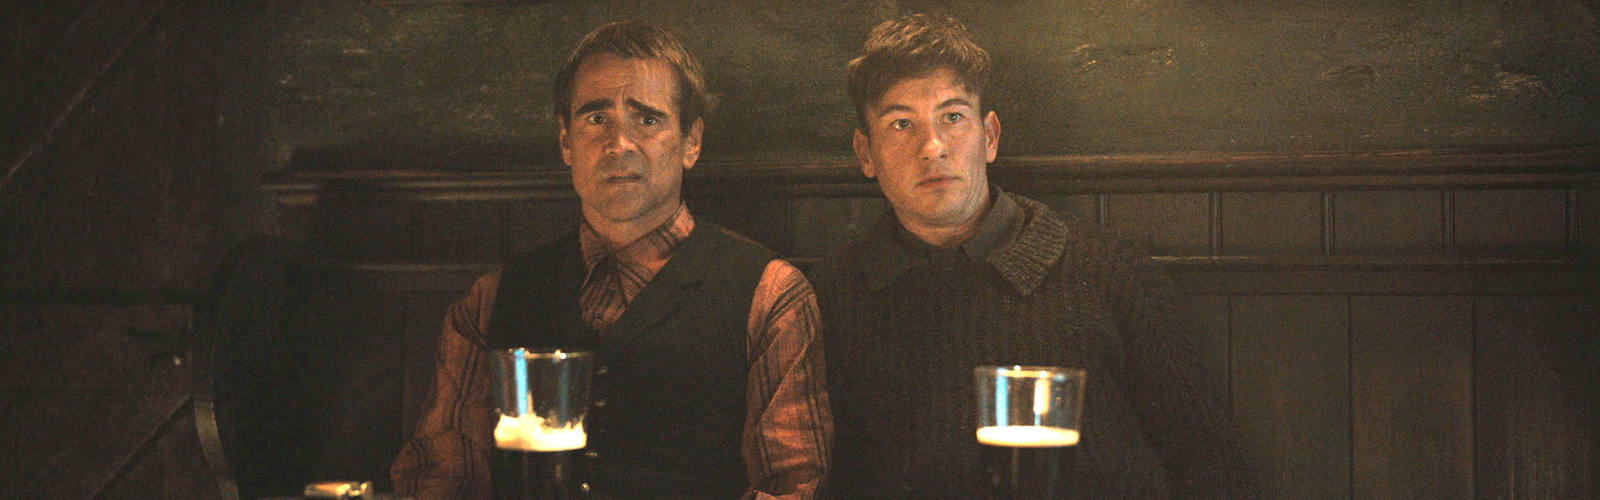 Colin Farrell Couldn’t Be More Delighted That His Fellow Irish Actors, Including Barry Keoghan, Are Having A Moment